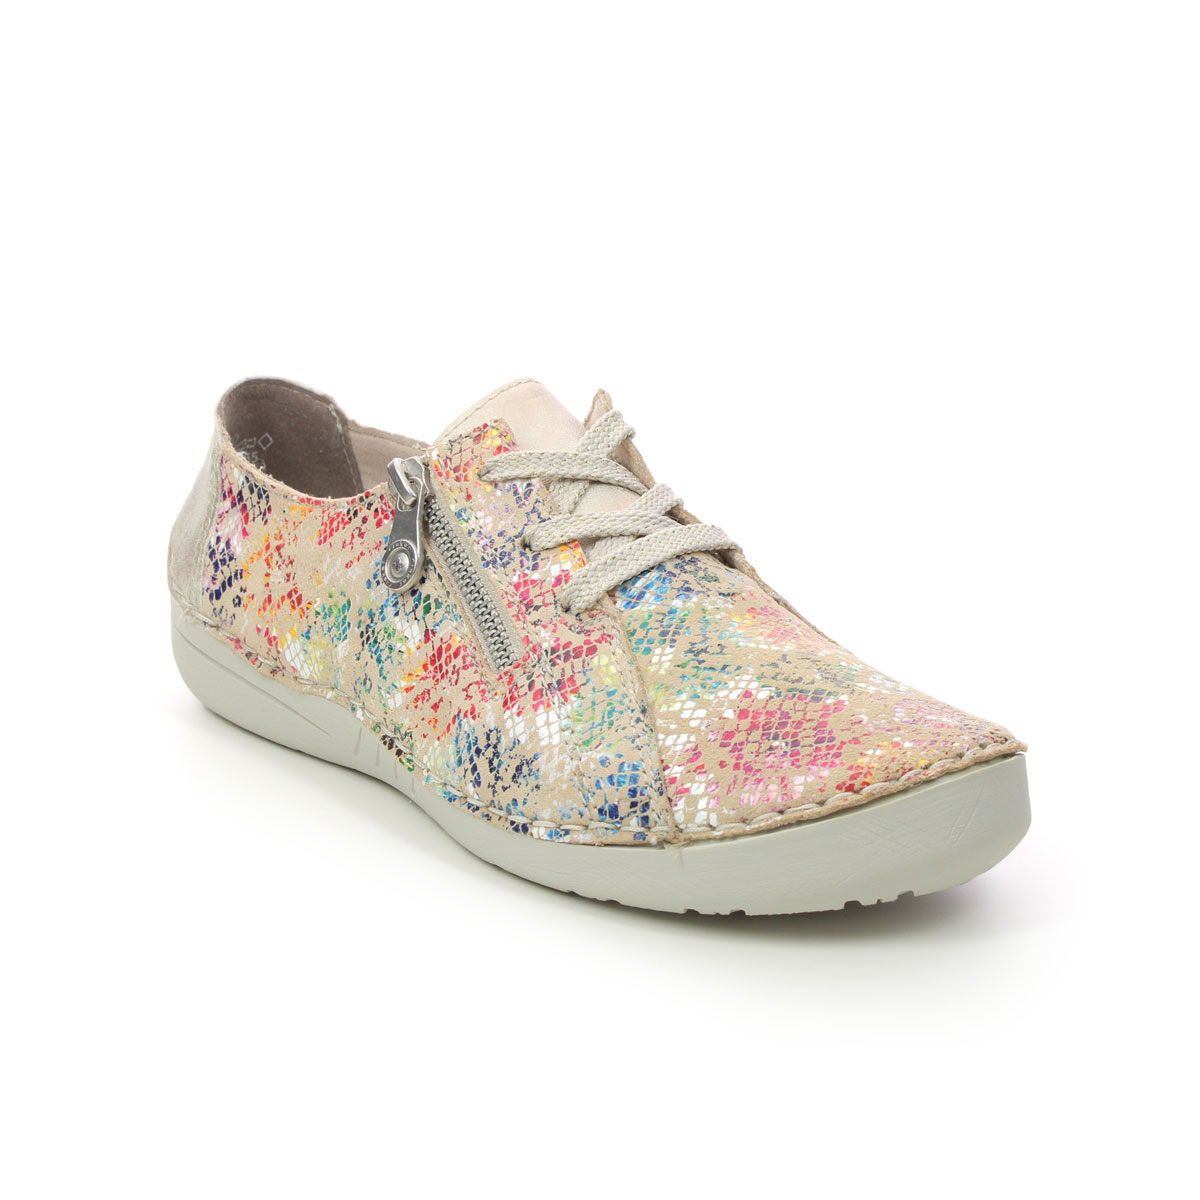 Rieker 52511-90 Floral print Womens lacing shoes in a Plain Leather and Man-made in Size 38